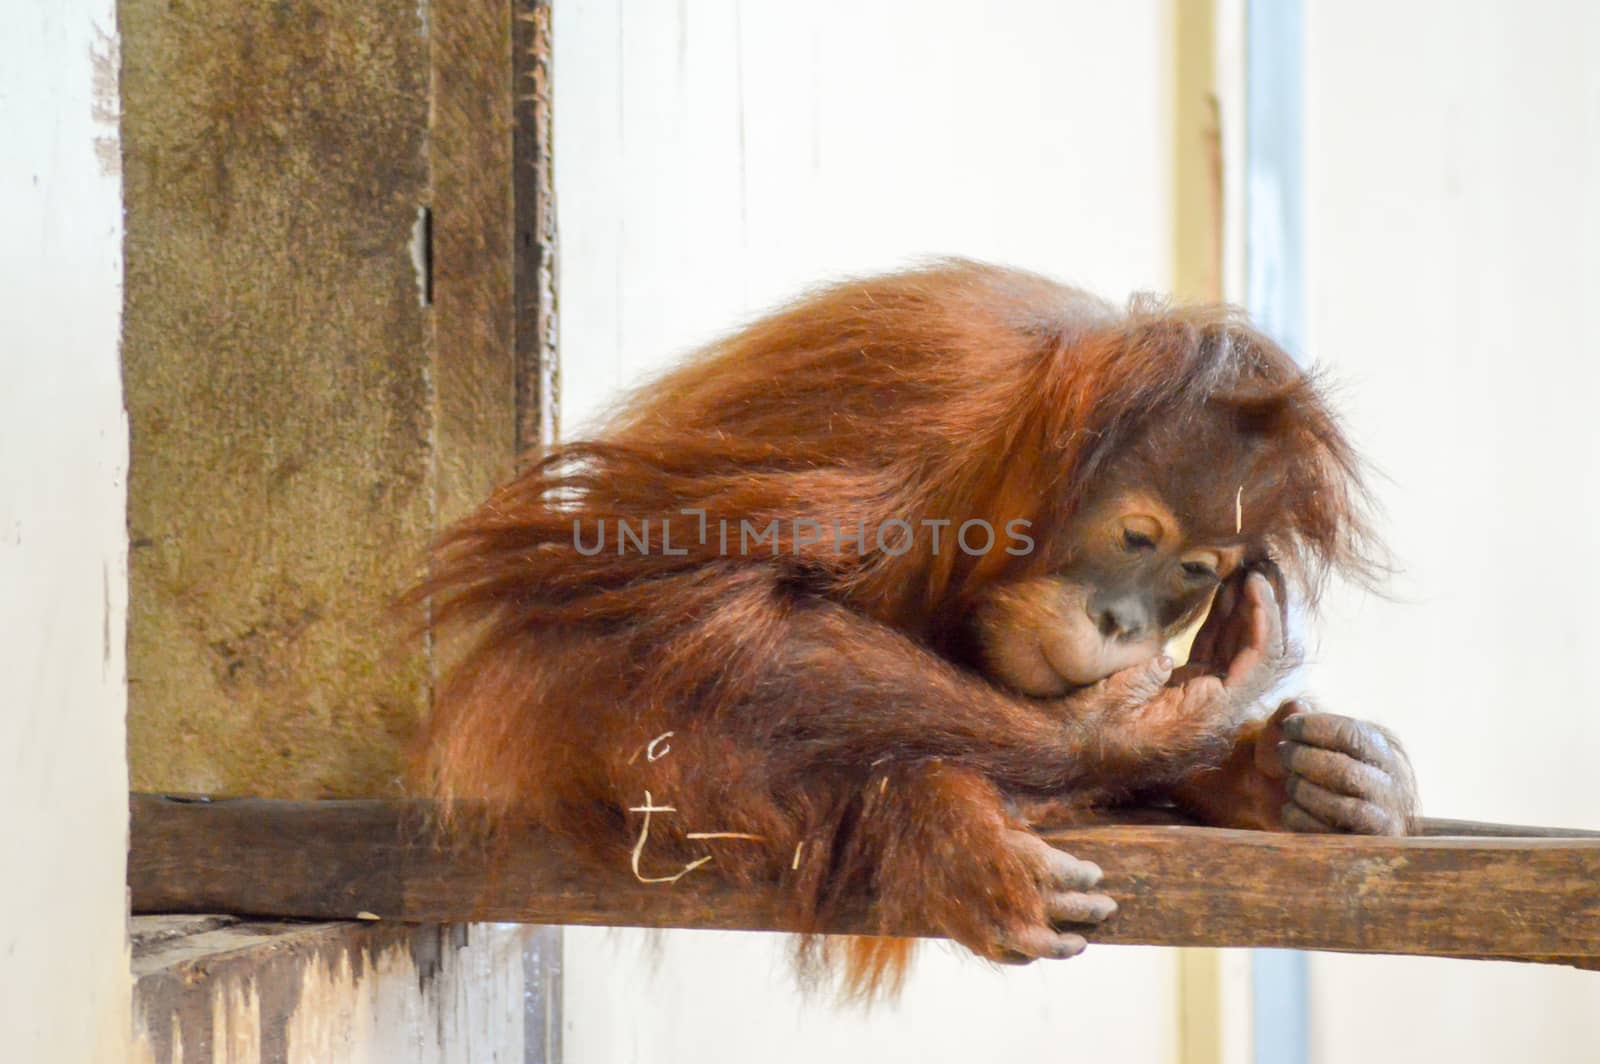 Young Monkey Orang-Outang on a branch in a wildlife park